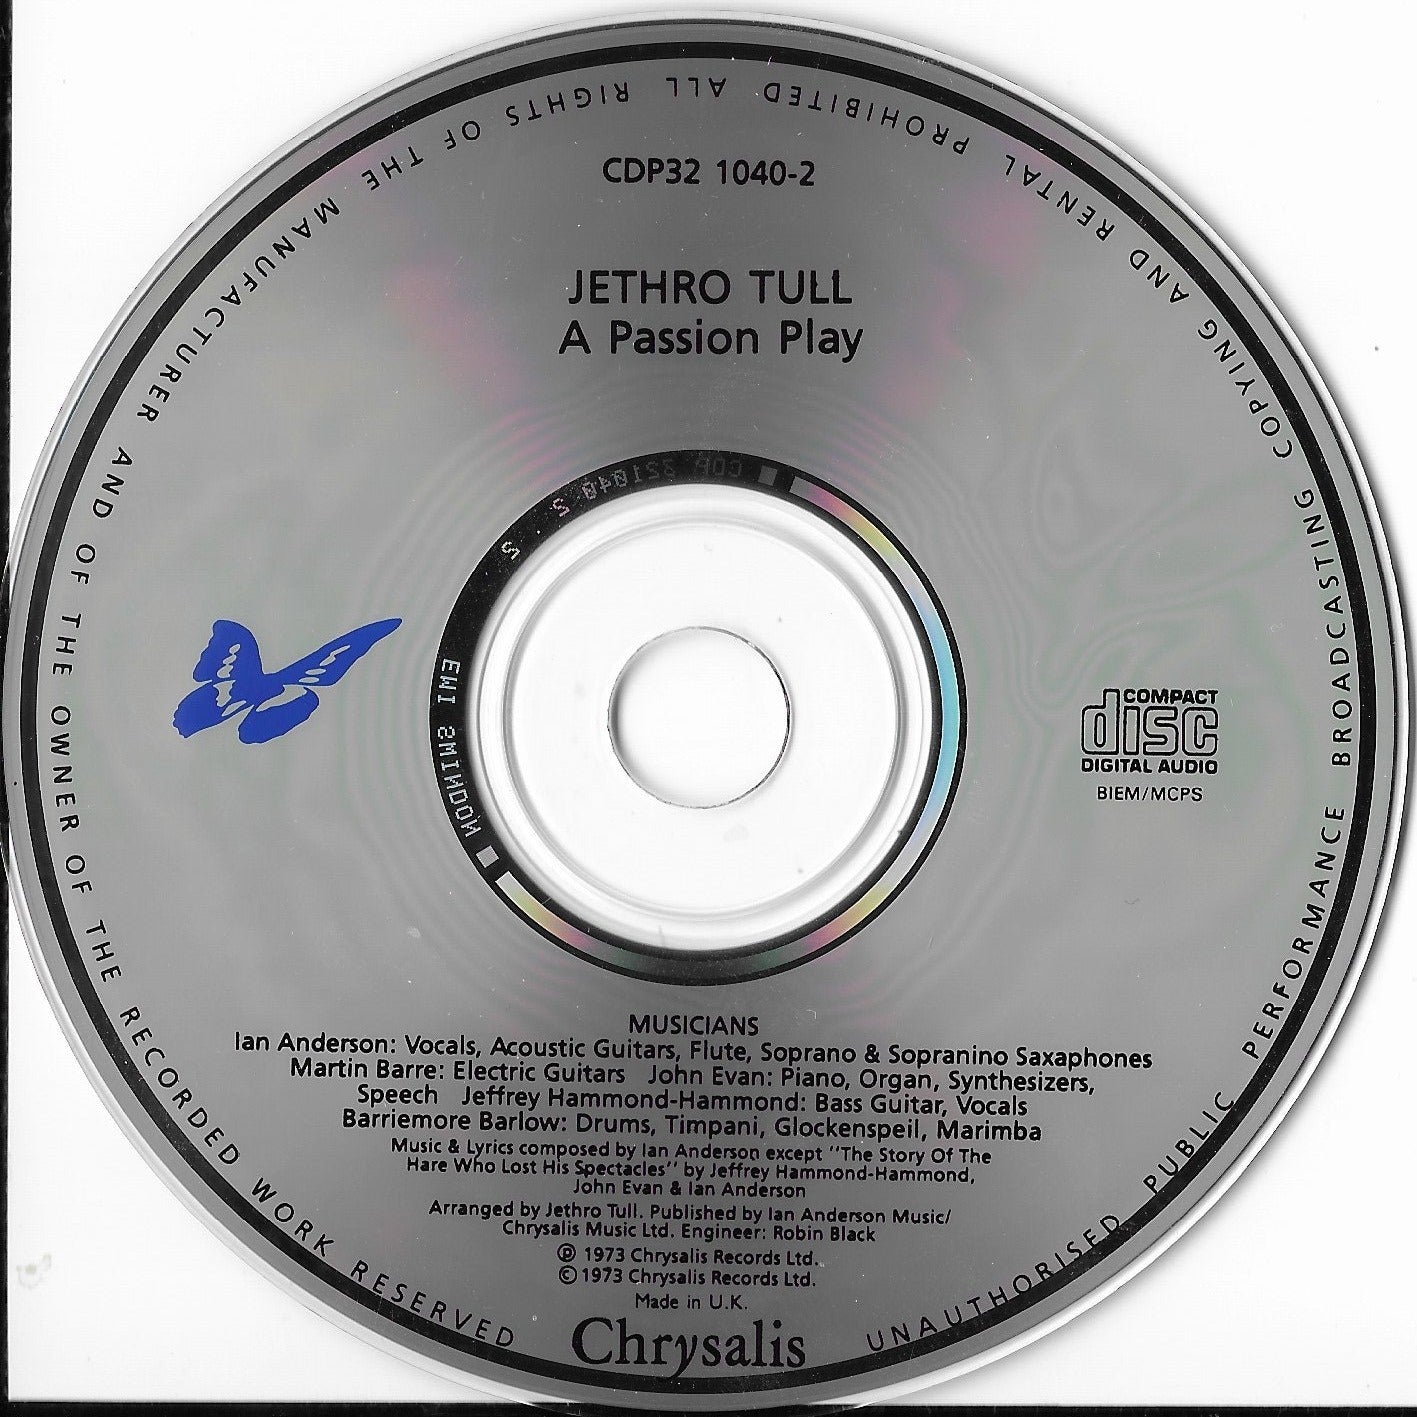 JETHRO TULL - A Passion Play